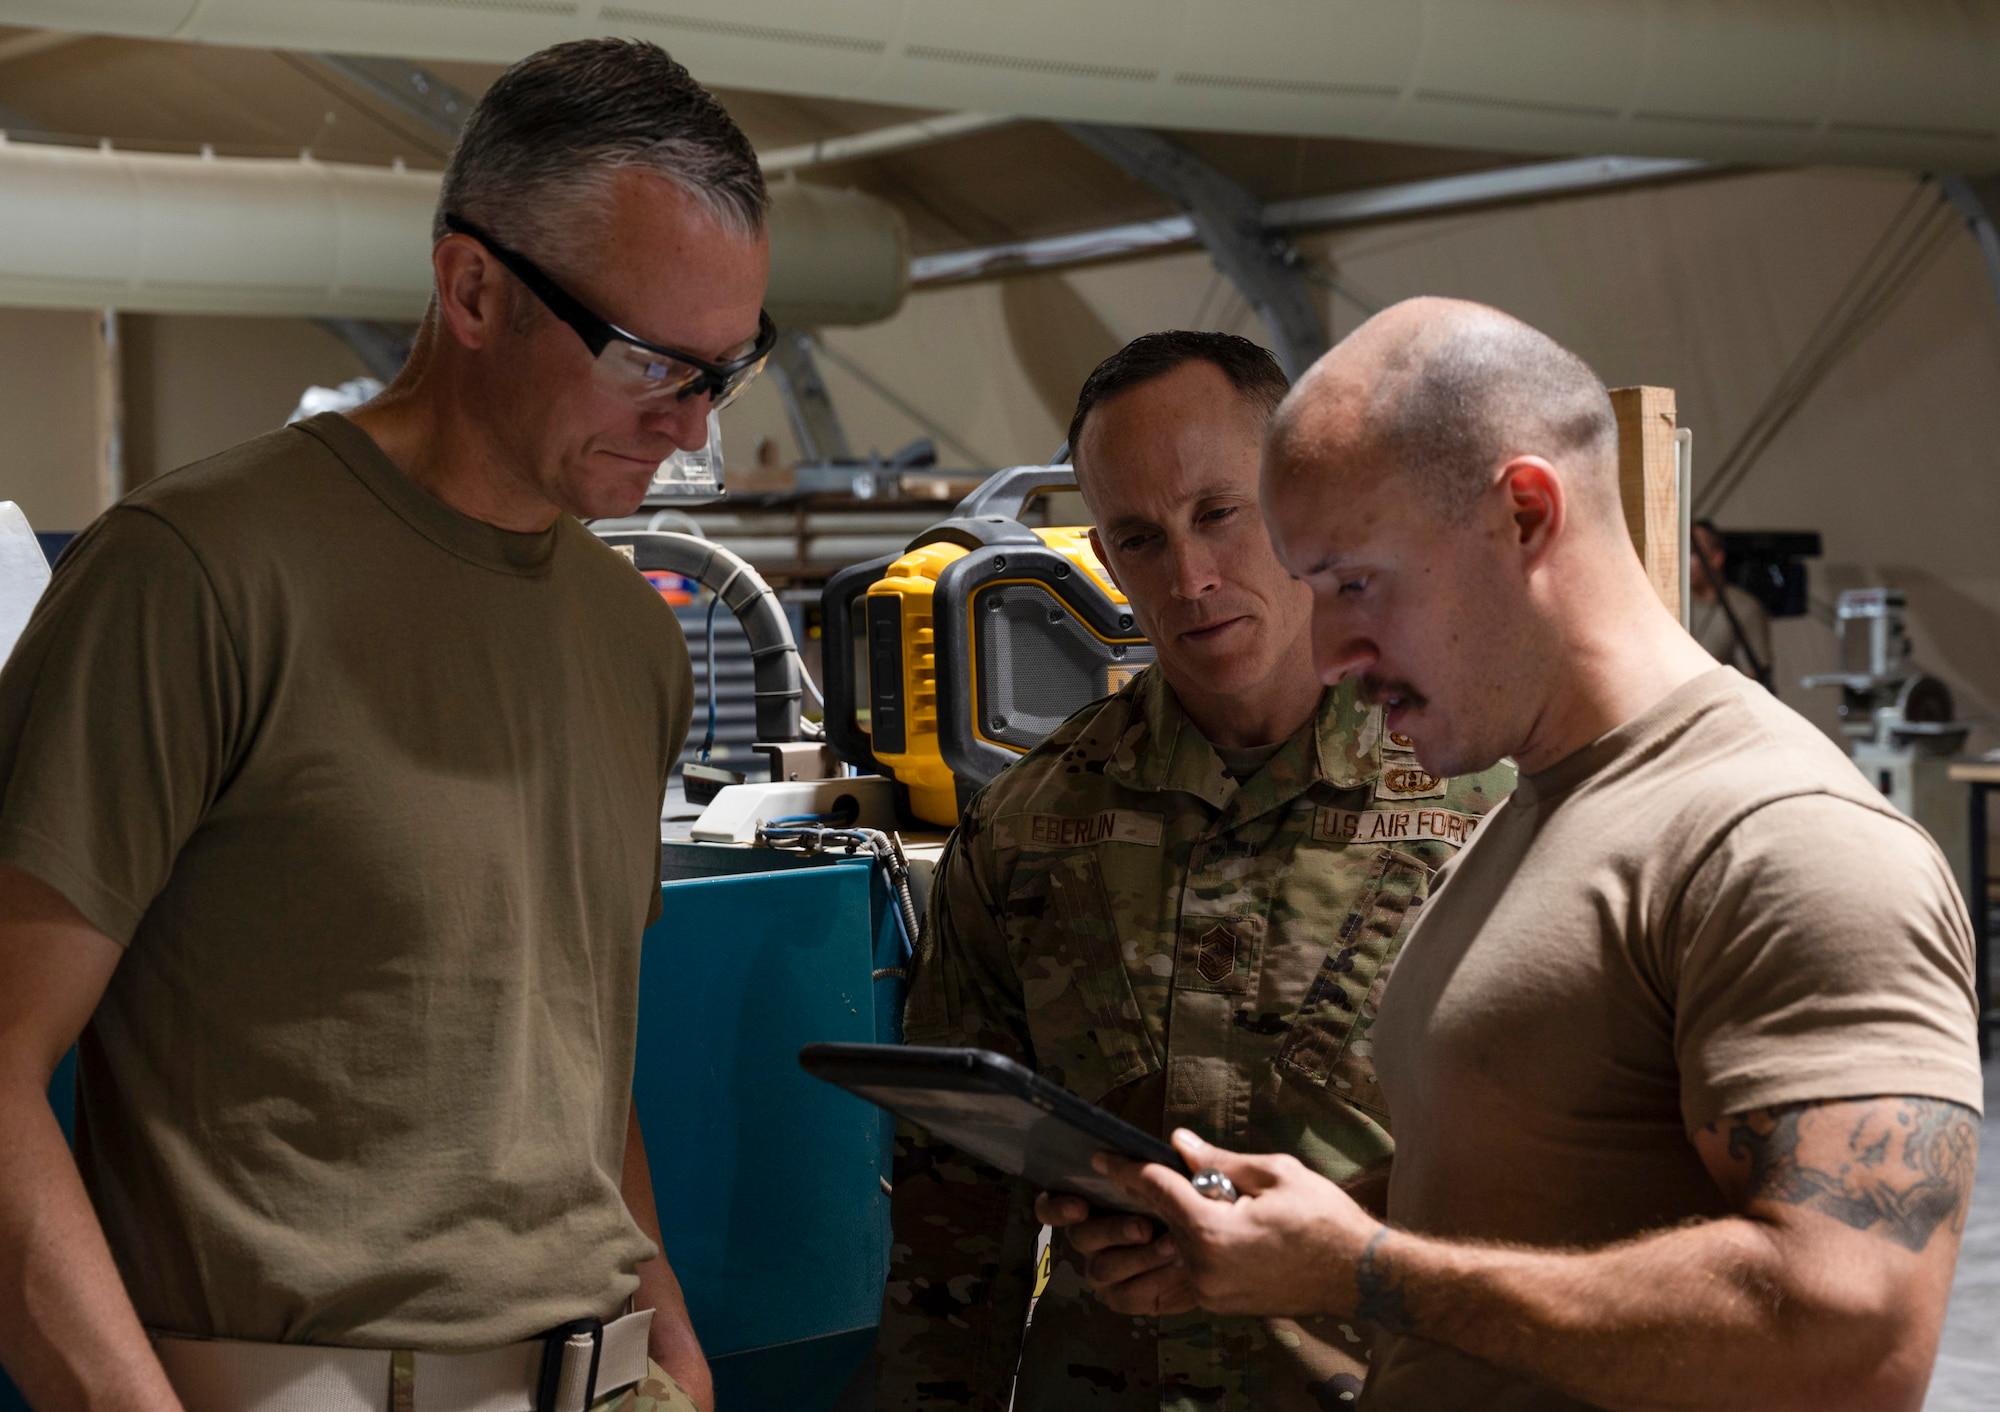 U.S. Air Force Brig. Gen. Ryan Messer and 332d Aerial Expeditionary Wing leadership visit the fabrication shop, 332d Aerospace Ground Equipment at an undisclosed location in Southwest Asia, August 22, 2022. AGE is responsible for repairing, fabricating or replacing the parts and equipment needed to carry out flight missions. These immersion visits provide greater insight into the unique skillsets every airman brings to the 332d AEW Red Tail team. (U.S. Air Force photo by: 1st Lt. Michael Luangkhot)